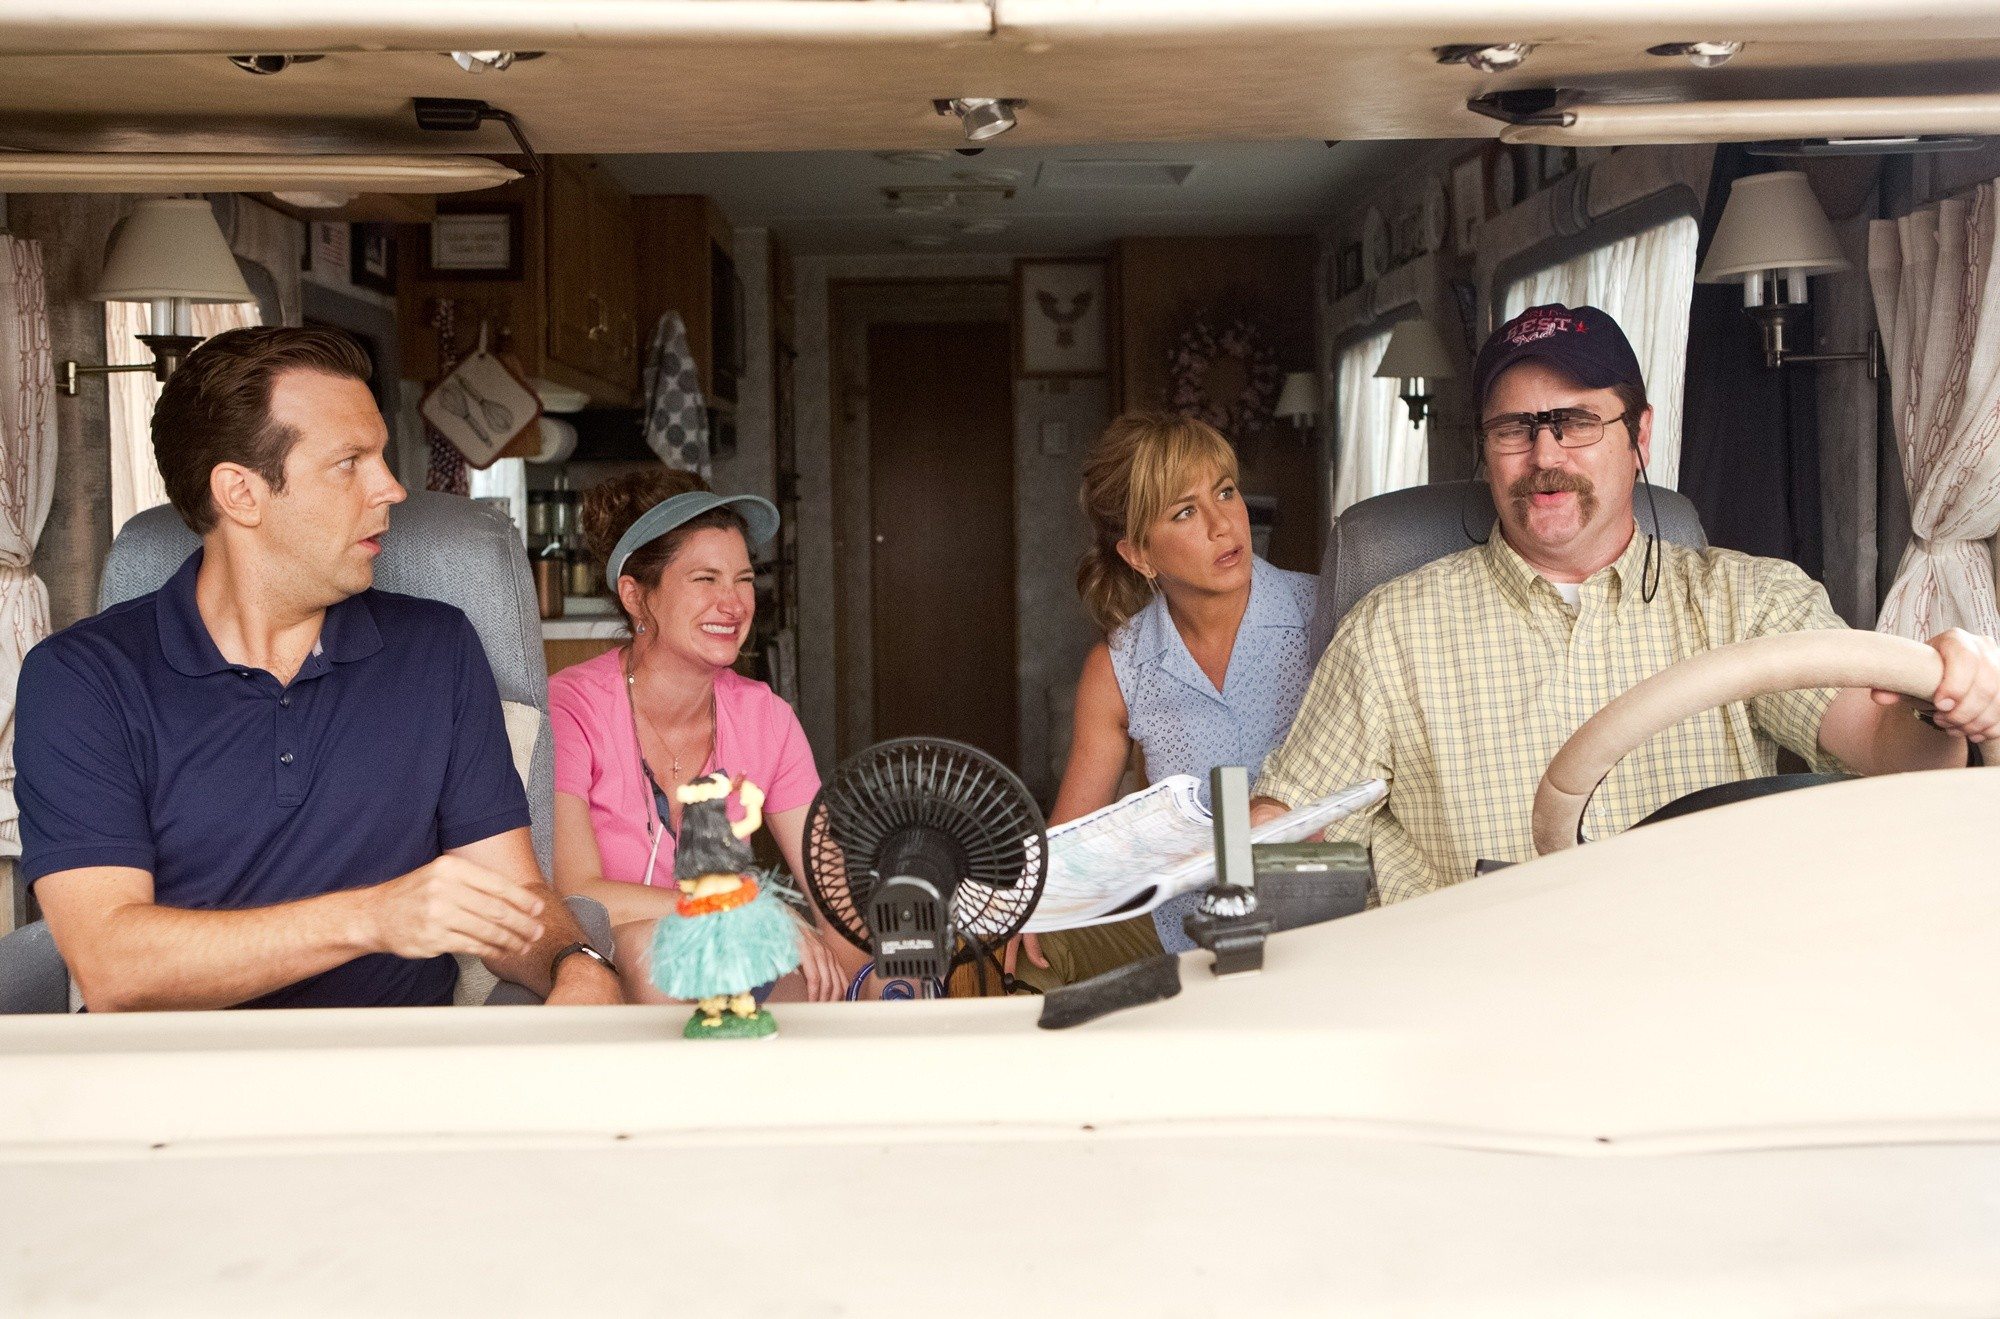 Jason Sudeikis, Kathryn Hahn, Jennifer Aniston and Nick Offerman in Warner Bros. Pictures' We're the Millers (2013)